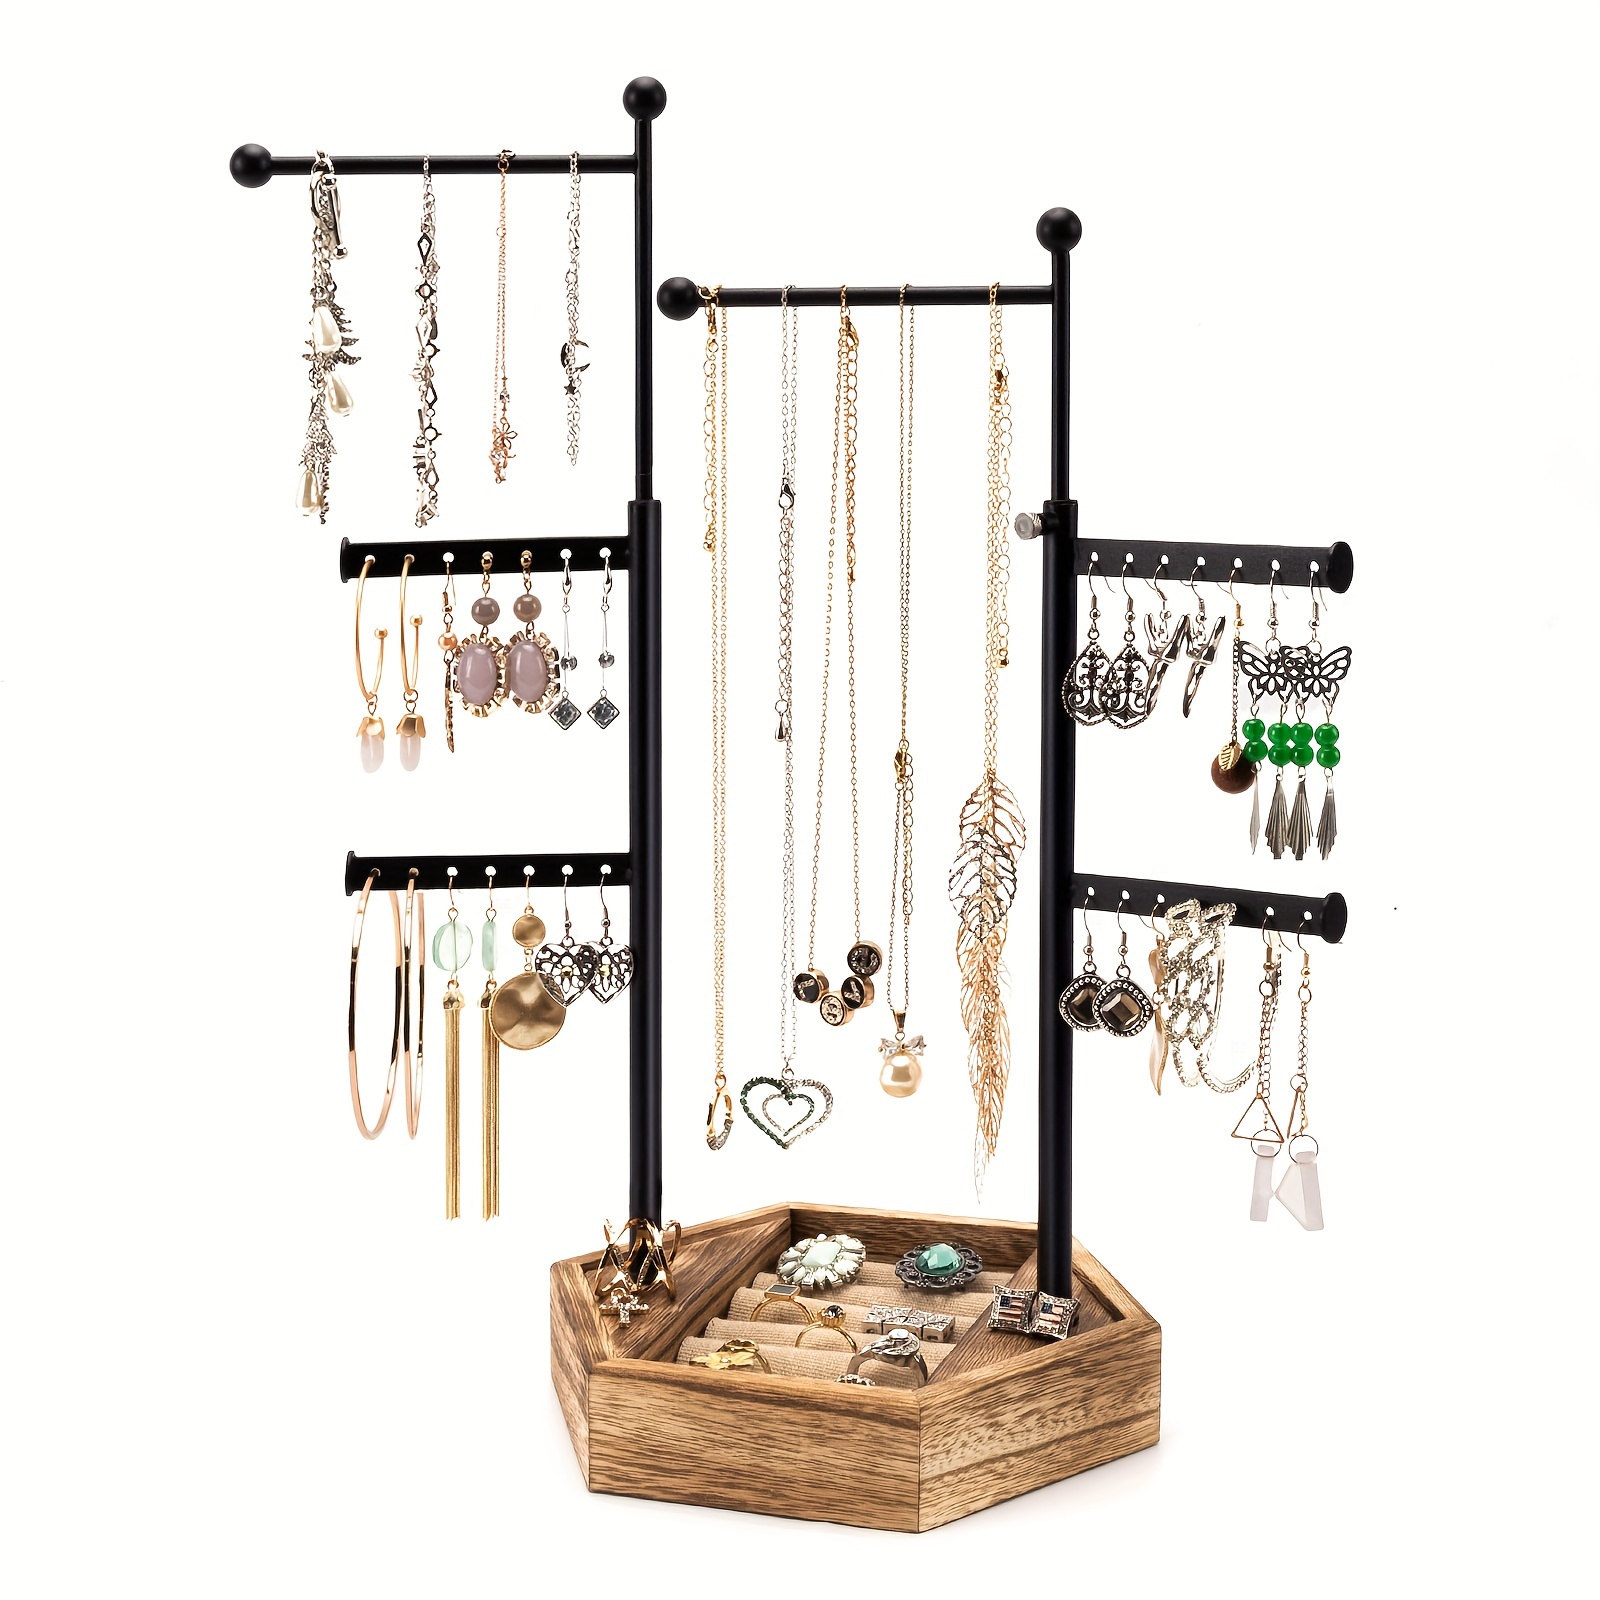 

1pc Jewelry Organizer Stand - 6 Tier Jewelry Holder With Adjustable Height Necklace Holder Organizer Display & Storage For Earrings Ring Bracelet (rustic Brown), Mother's Day Gift